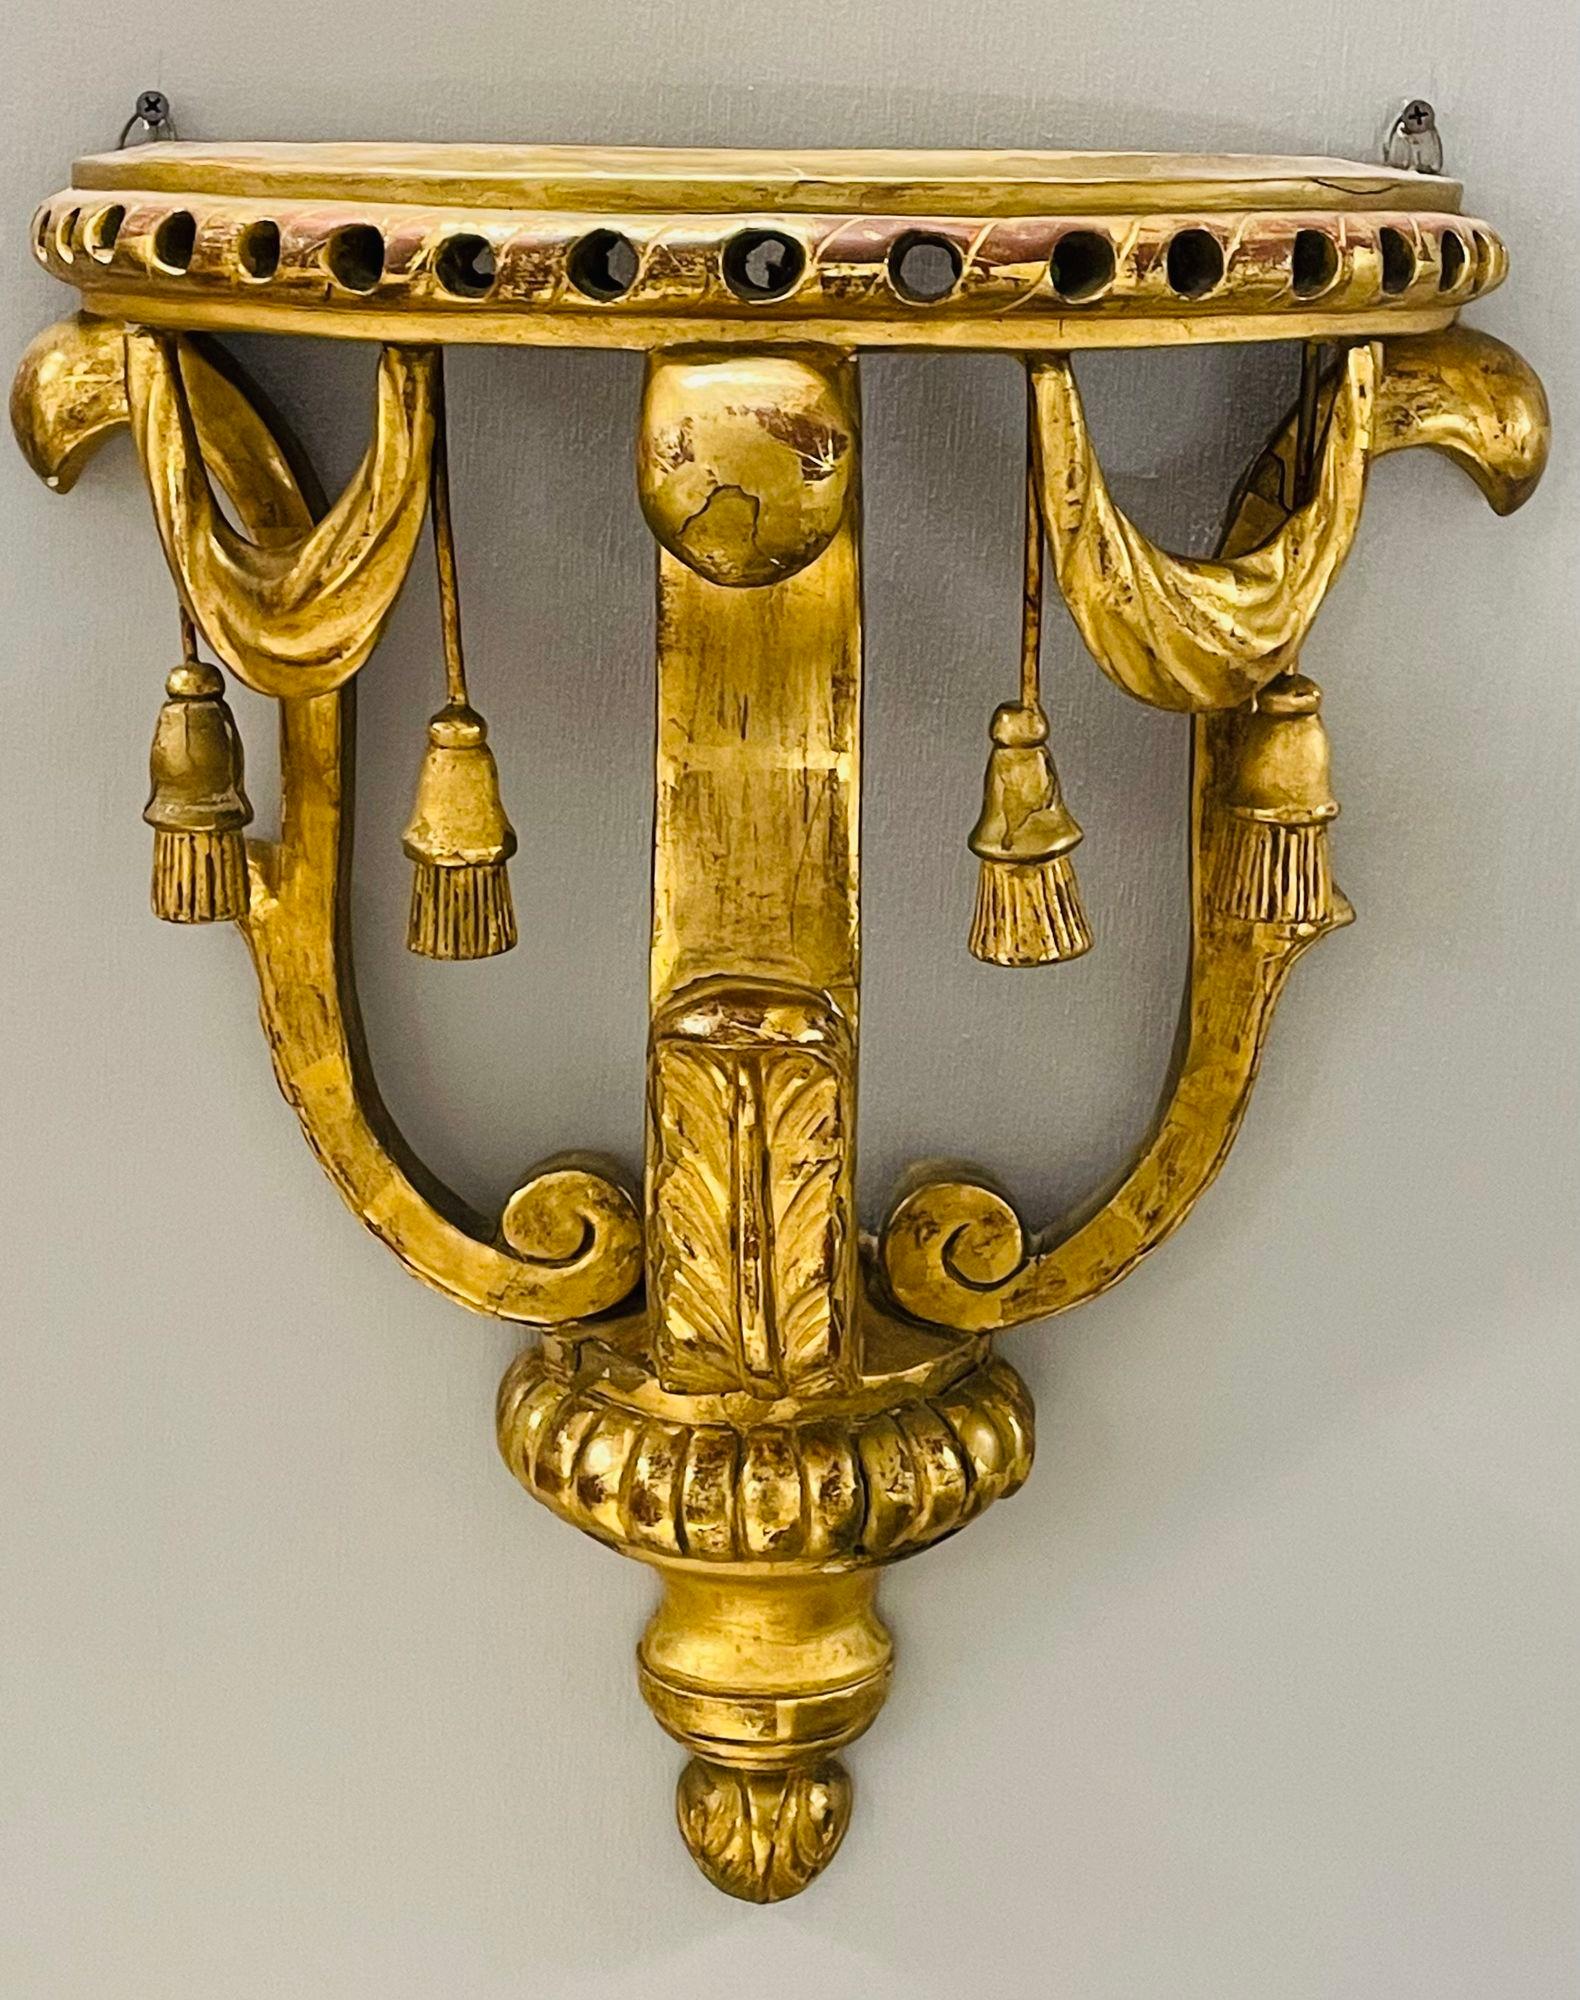 19th Century Gilt Wood Wall Bracket or Shelf, Water Gilt In Good Condition For Sale In Stamford, CT